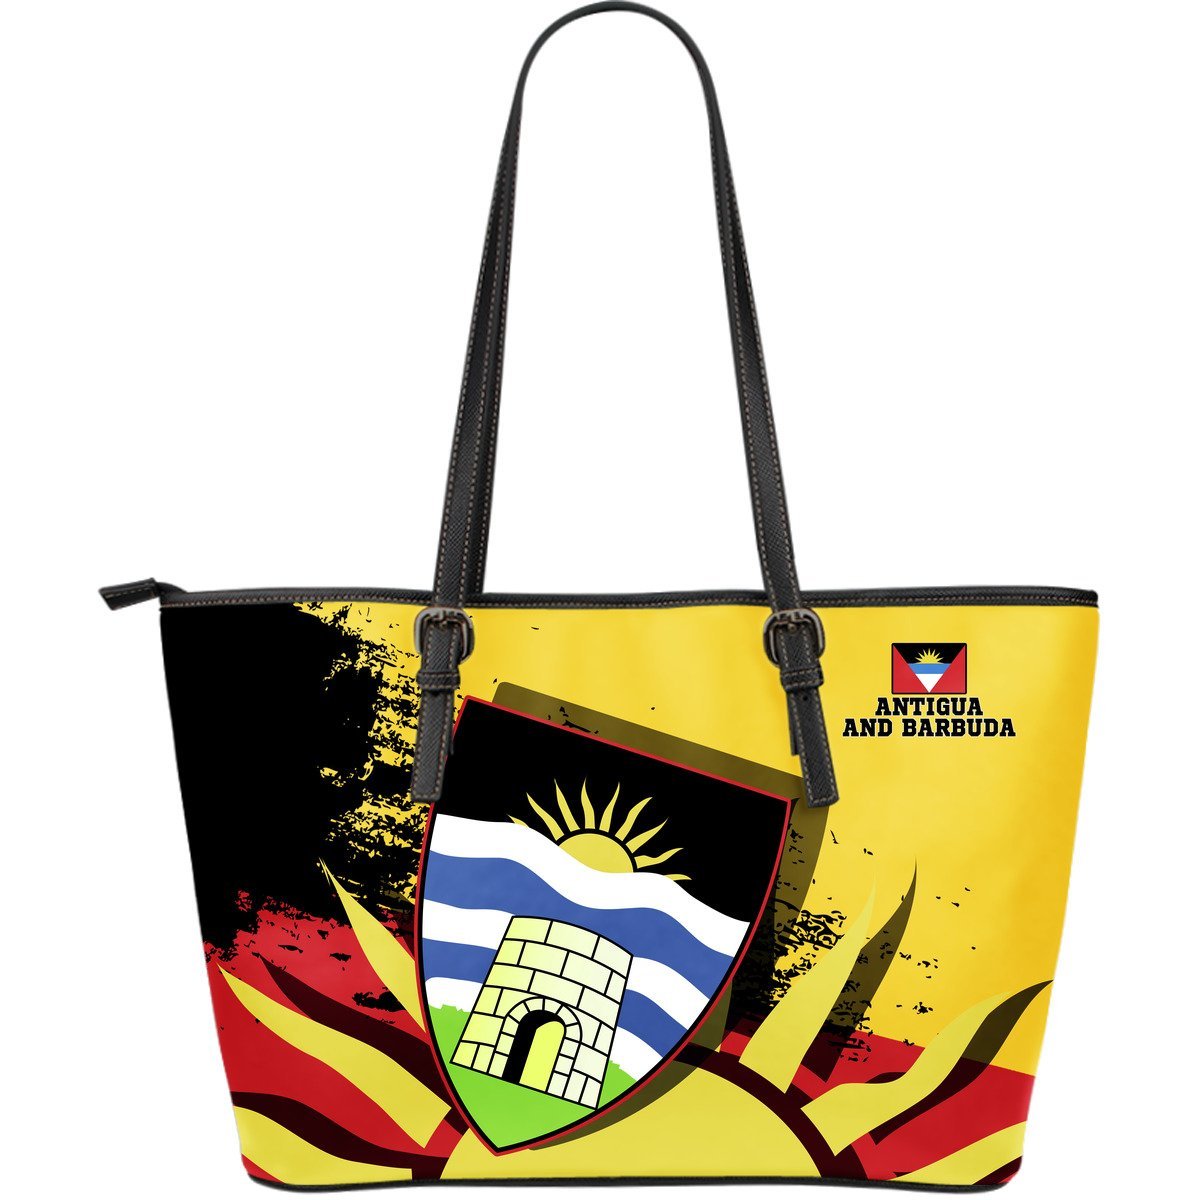 antigua-and-barbuda-bag-tote-special-style